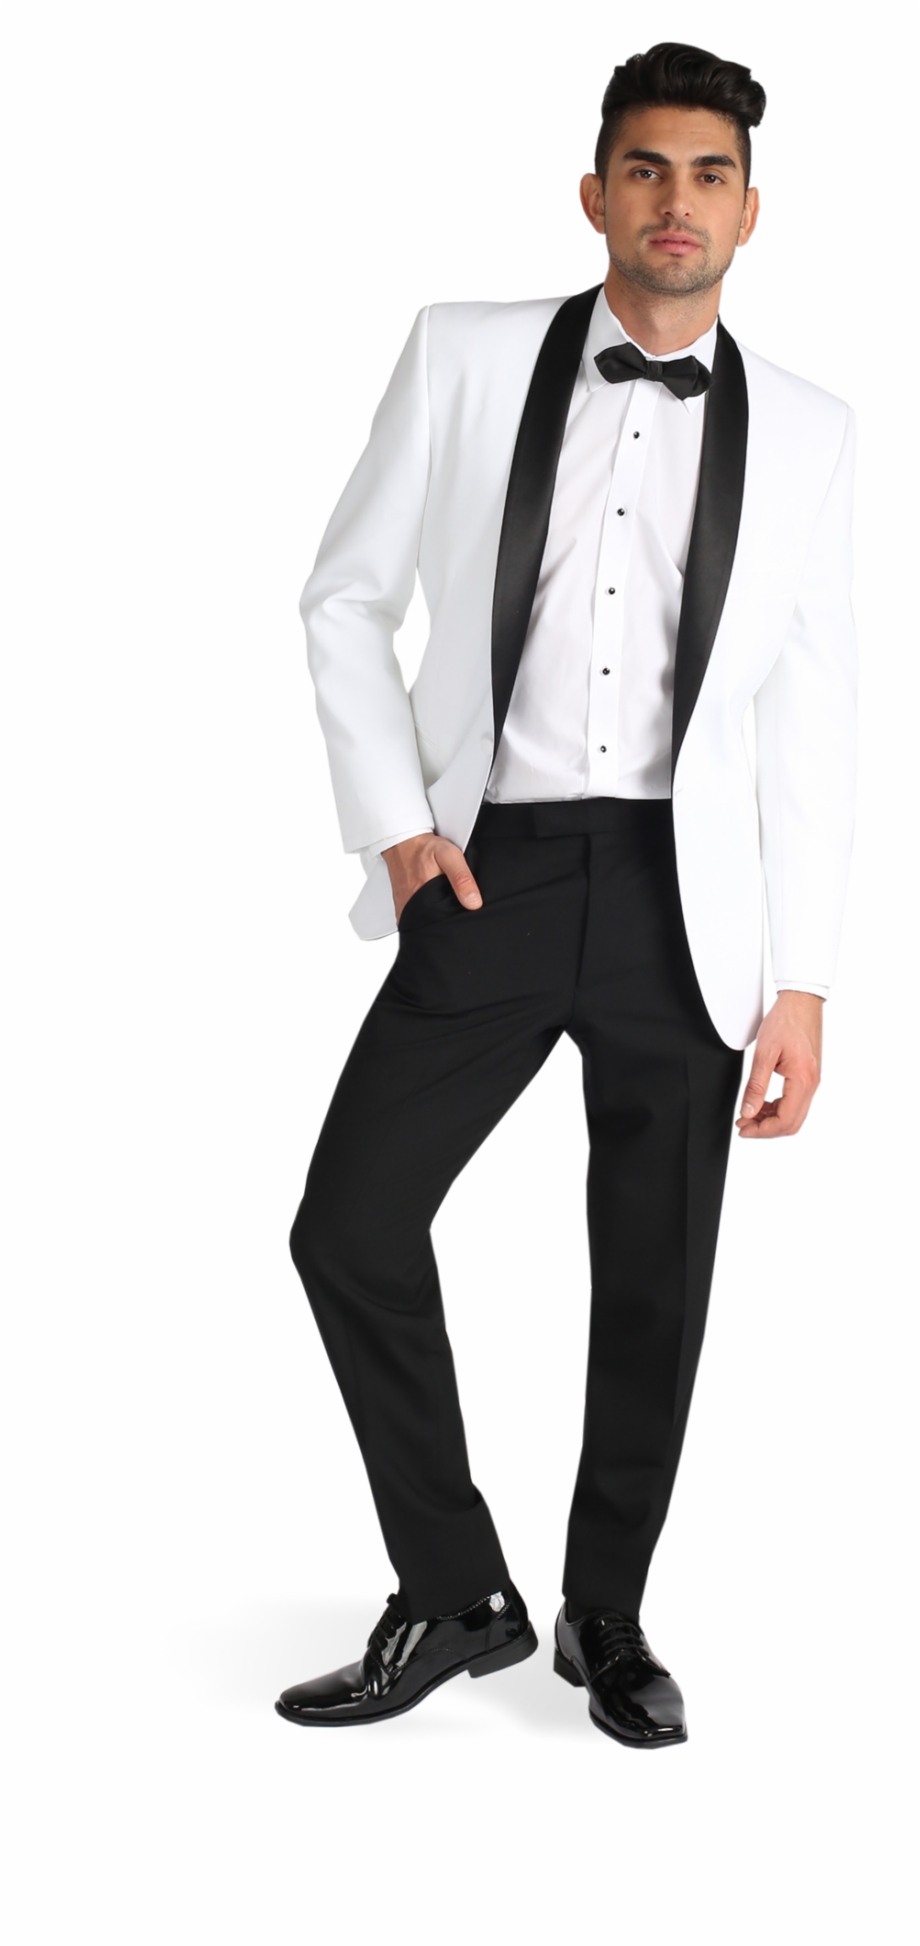 Free Tuxedo Clipart Black And White, Download Free Tuxedo Clipart Black ...